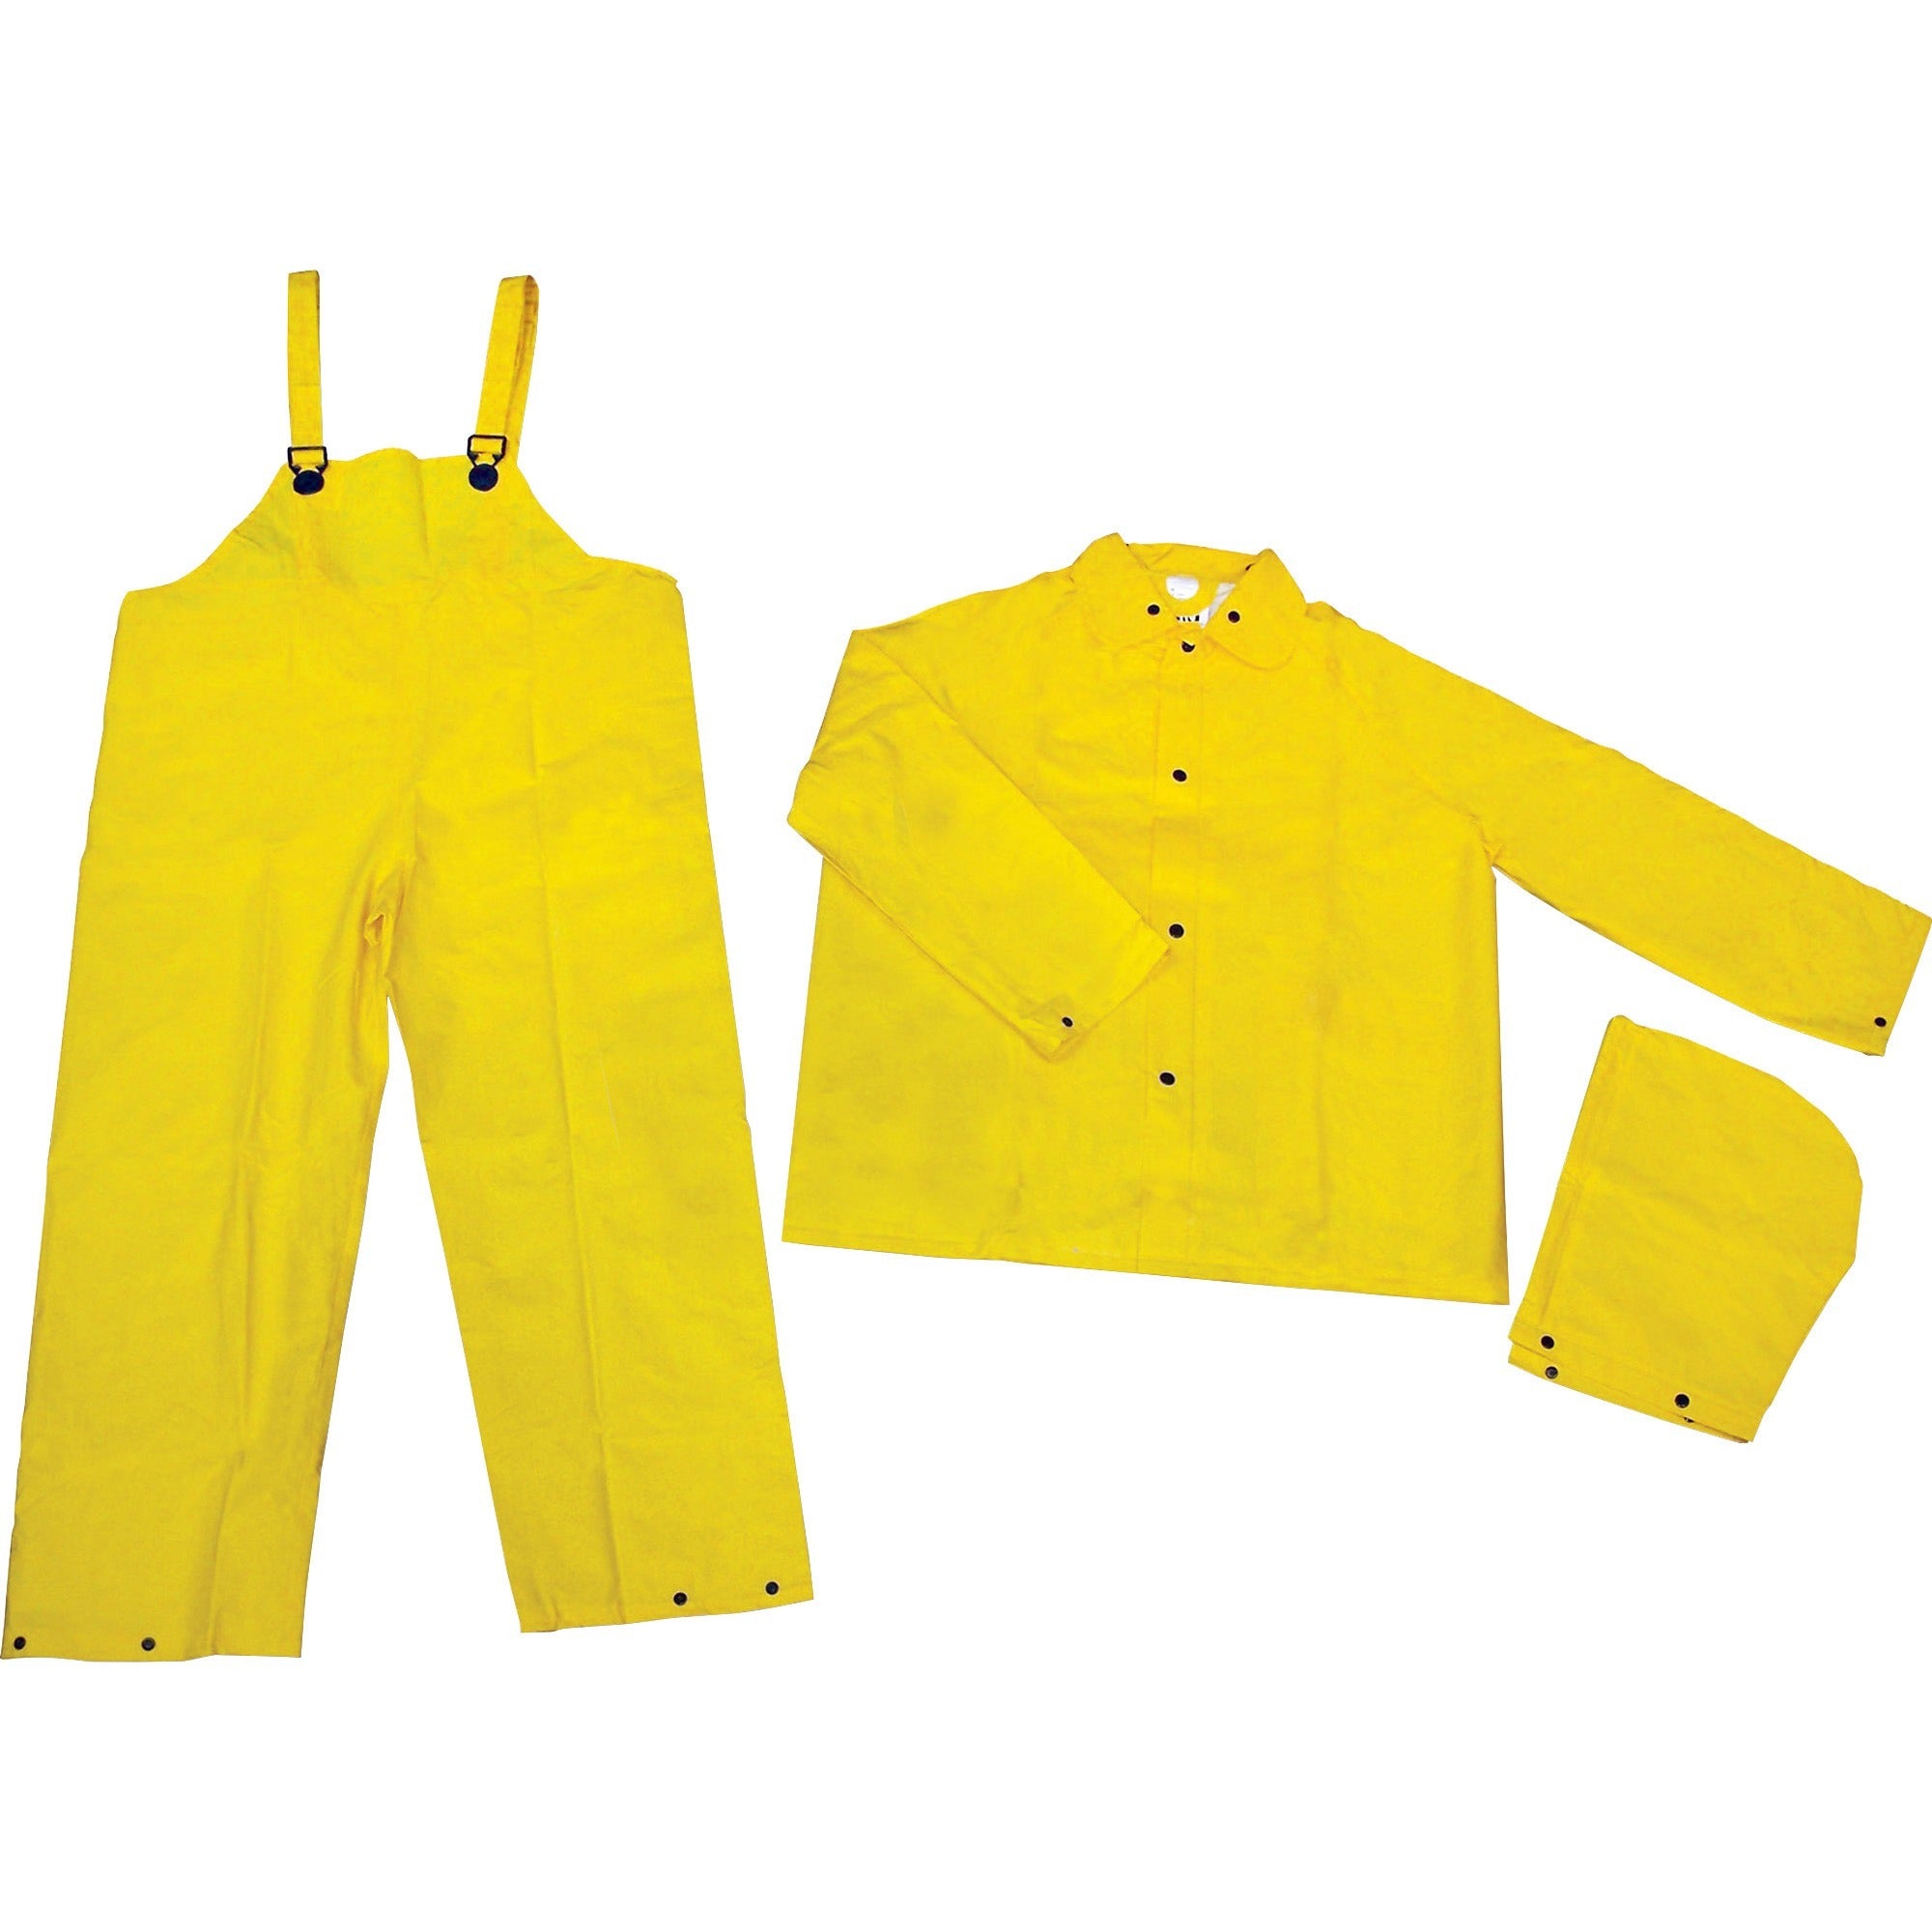 river-city-three-piece-rainsuit-recommended-for-agriculture-construction-transportation-sanitation-carpentry-landscaping-medium-size-water-protection-snap-closure-polyester-polyvinyl-chloride-pvc-yellow-1-each_mcs2003m - 1